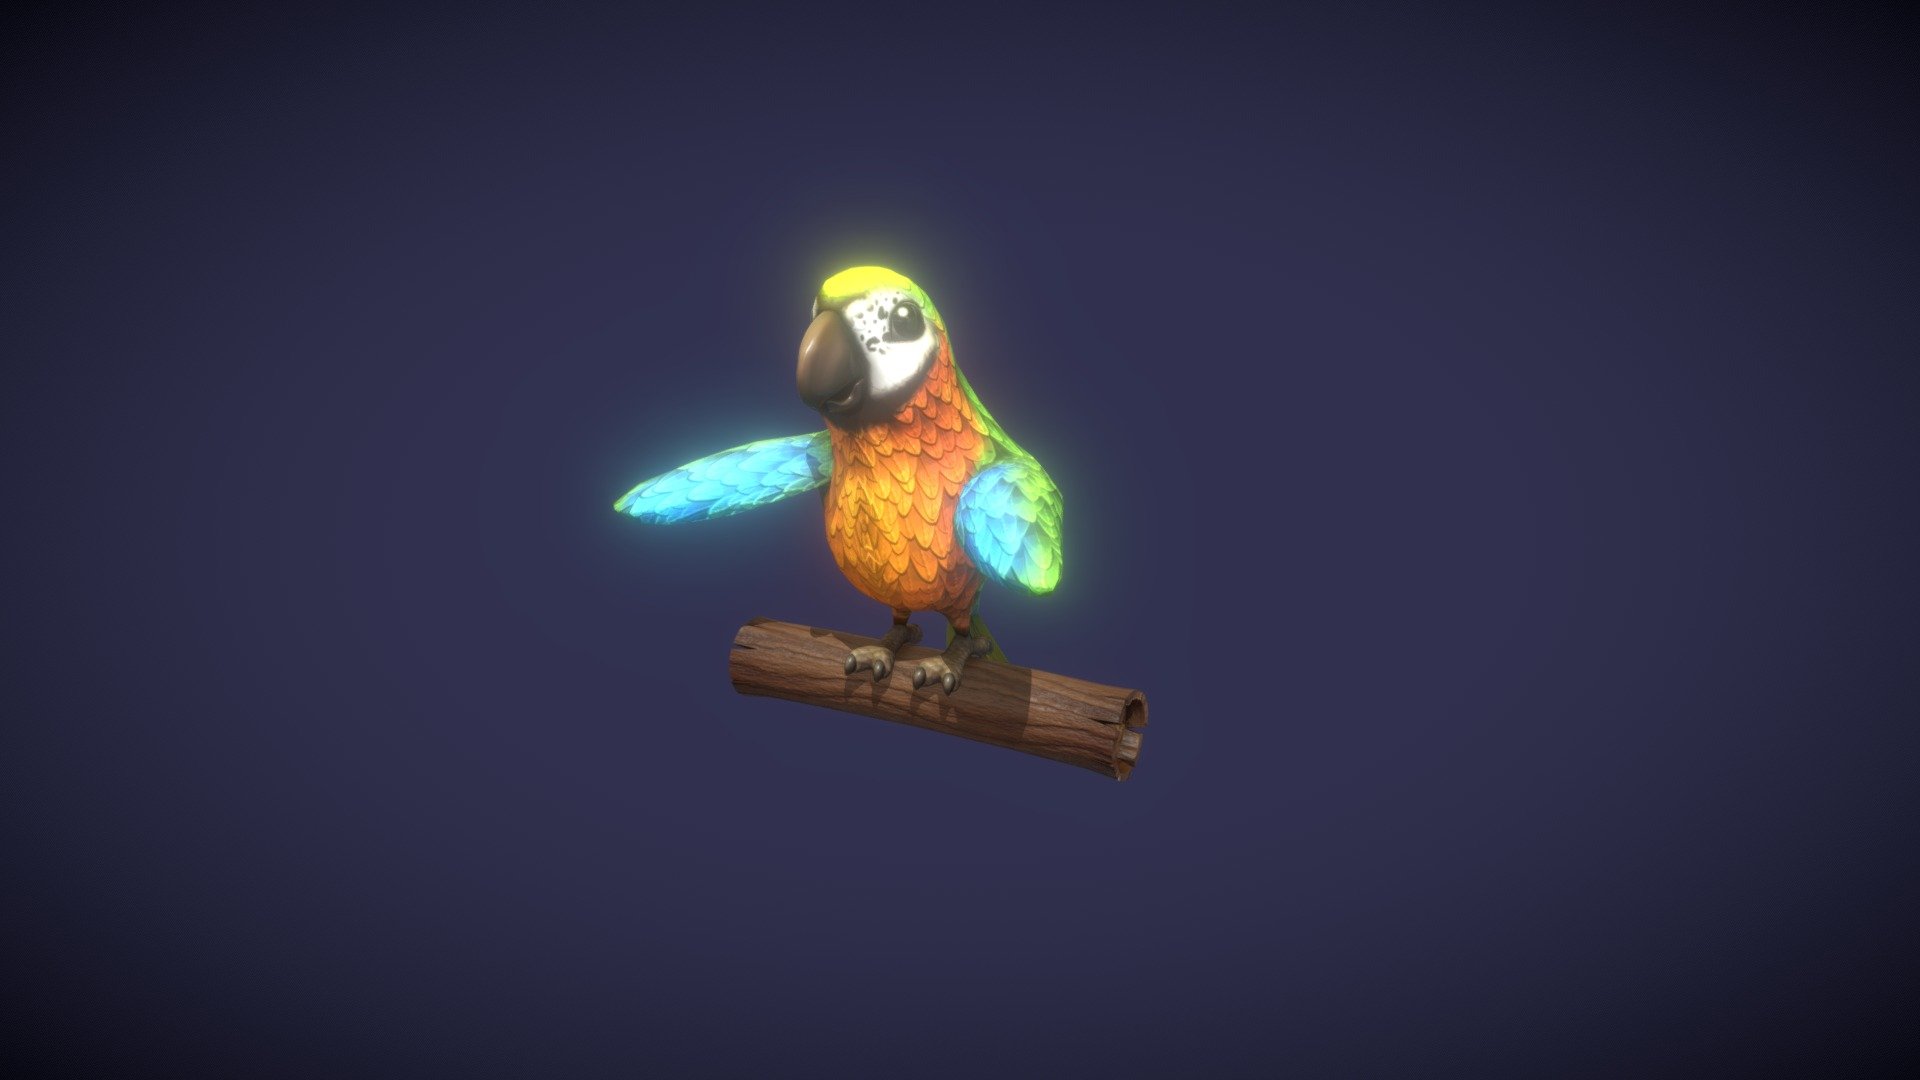 Cartoon Ara Parrot Blue-Yellow-Green Animated 3D Model is completely ready to be used in your games, animations, films, designs etc.  

All textures and materials are included and mapped in every format. The model is completely ready for visualization in any 3d software and engine.  

Technical details:  


File formats included in the package are: FBX, OBJ, GLB, ABC, DAE, PLY, STL, BLEND, gLTF (generated), USDZ (generated)
Native software file format: BLEND
Render engine: Eevee
Parrot - Polygons: 4,275, Vertices: 3,983
Branch - Polygons: 268, Vertices: 250
Textures: Color, Metallic, Roughness, Normal, AO
All textures are 2k resolution.
The model is rigged and animated.
7 animations are included: idle, talk, walk, take off, fly, glide, land. All animations (besides the take off and the landing) are full cycles.
Only following formats contain rig and animation: BLEND, FBX, GLTF/GLB
 - Cartoon Ara Parrot Blue-Yellow-Green Animated 3D - Buy Royalty Free 3D model by 3DDisco 3d model